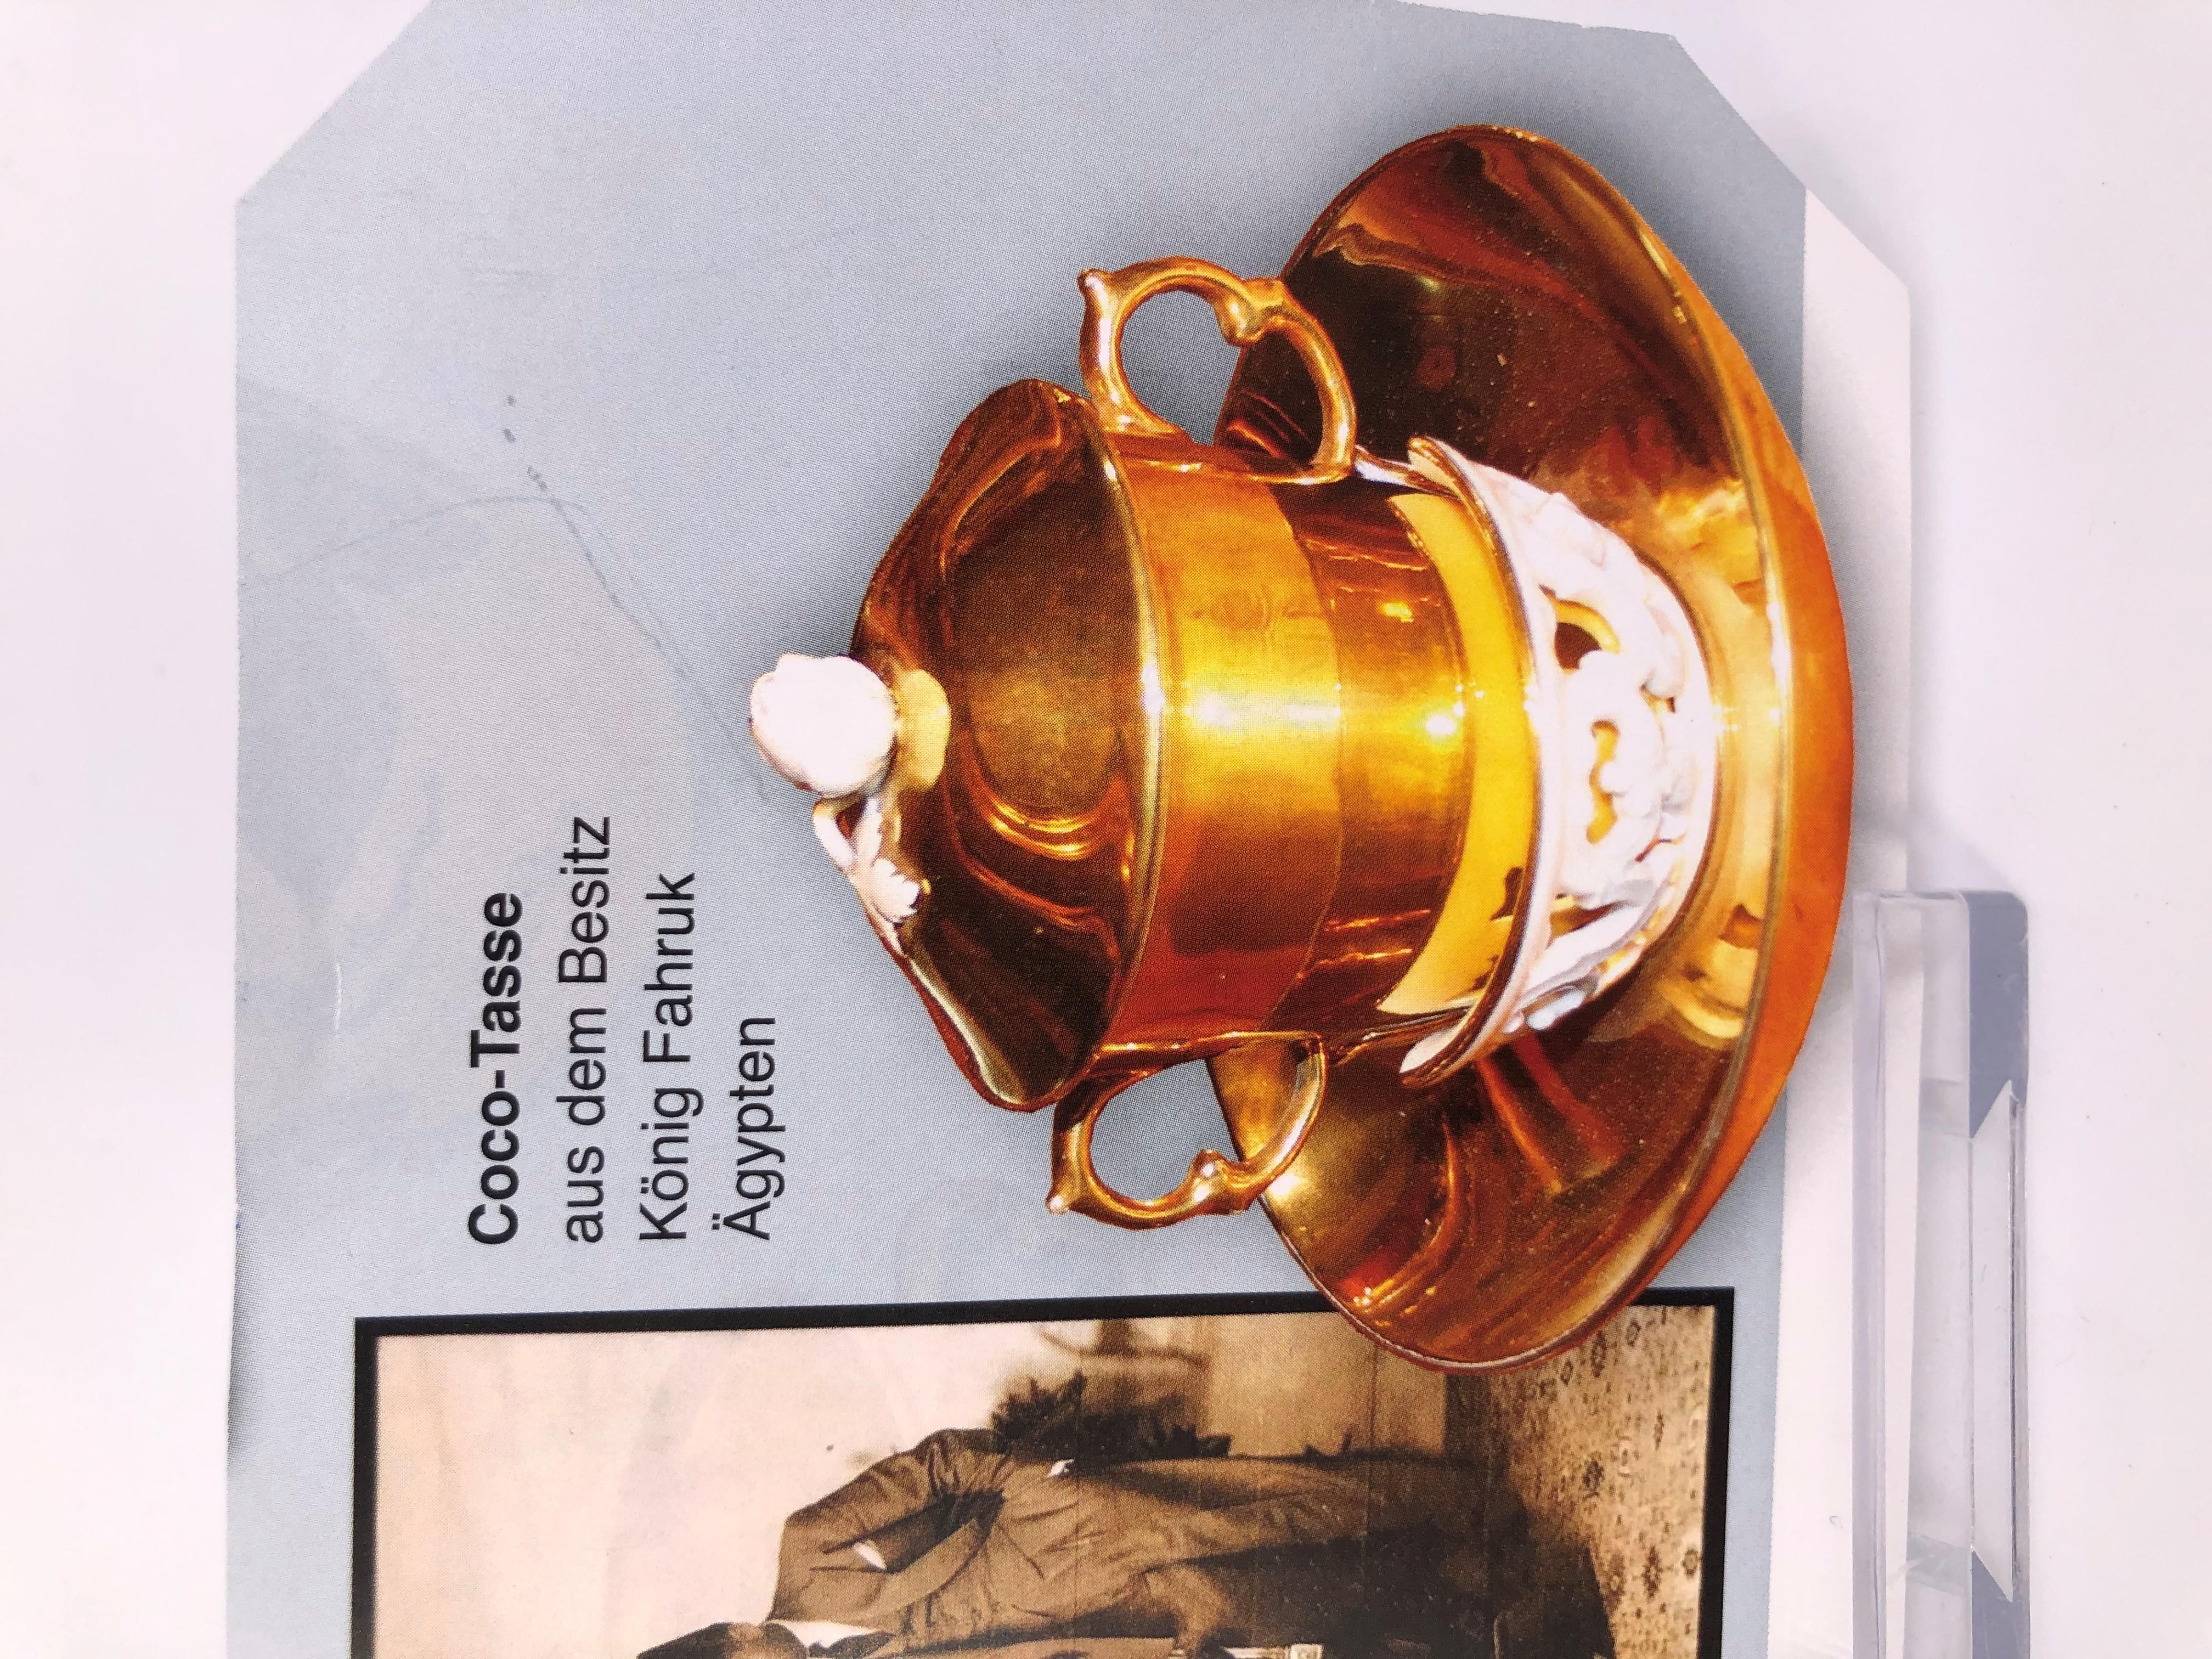 Meissen chocolate cup from the wedding service of Egyptian king Fahruk (see the picture) every wedding guest can take their Meissen porcelain chocolate cup (also called zitterTasse in german) home such museum pieces are very rare to find worldwide.